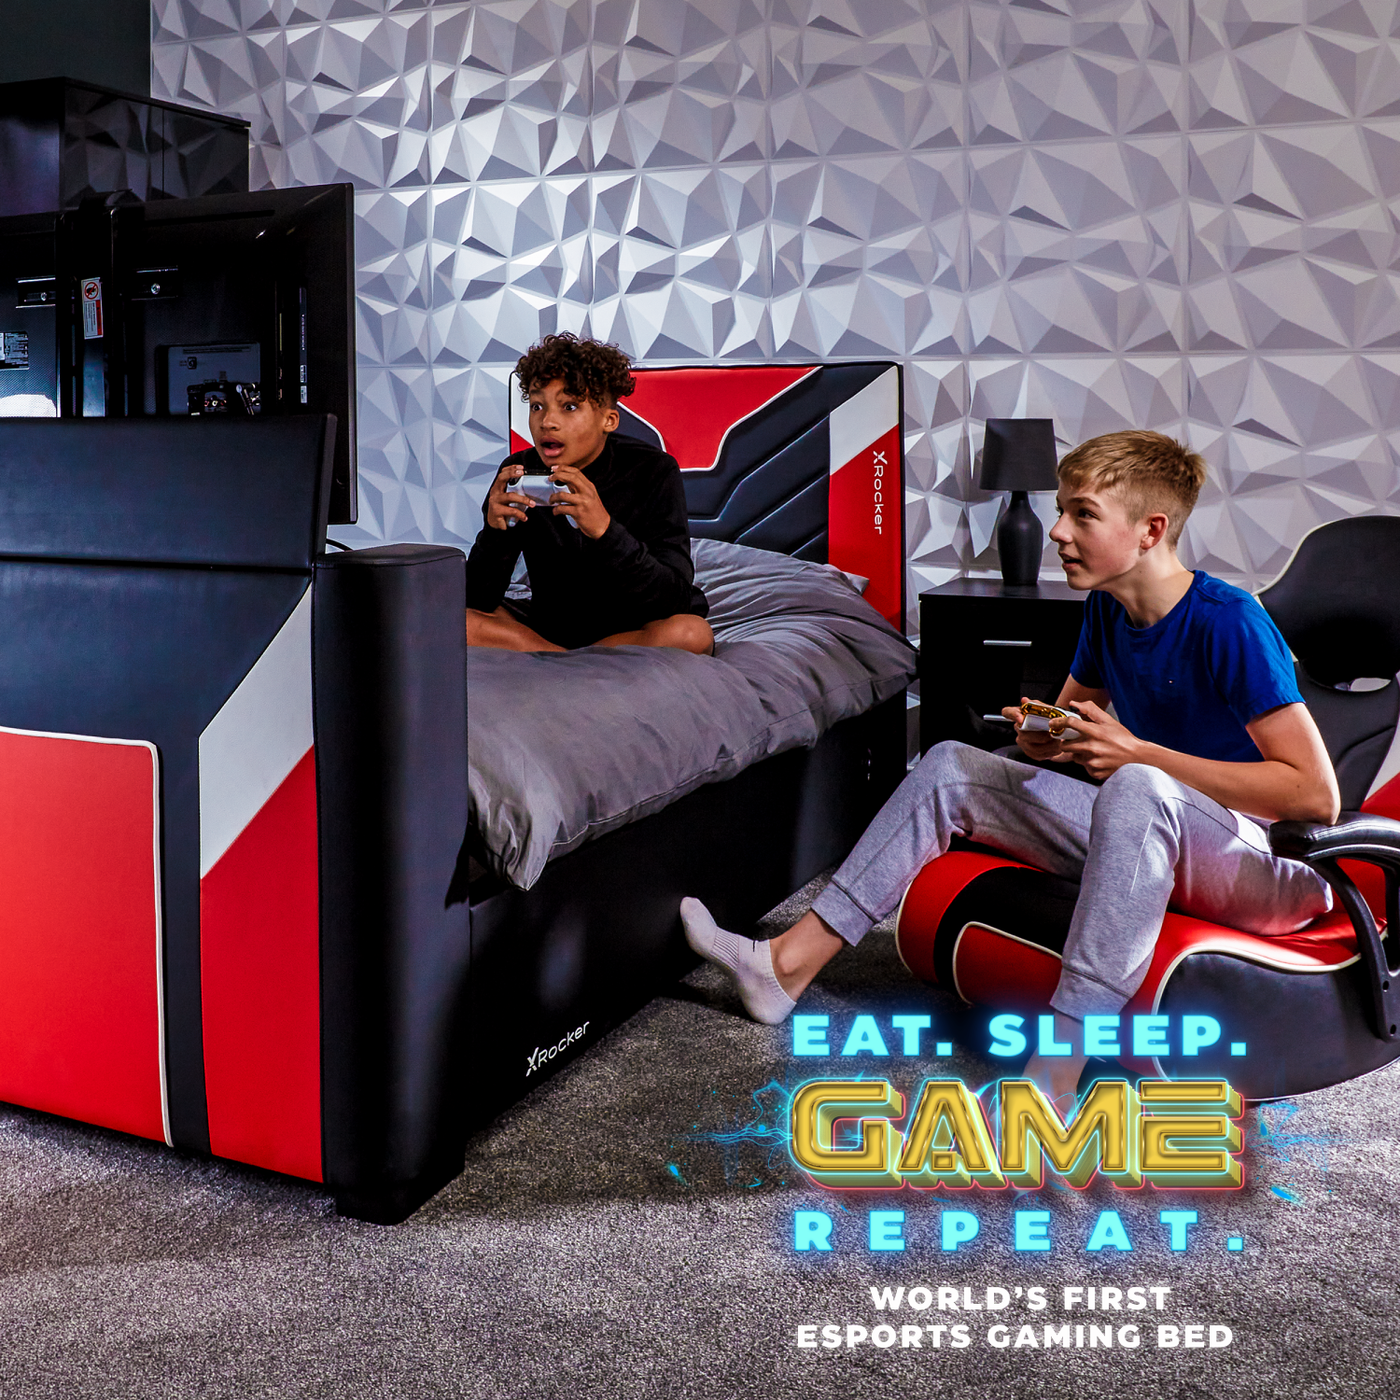 The World's First Esports Gaming Bed